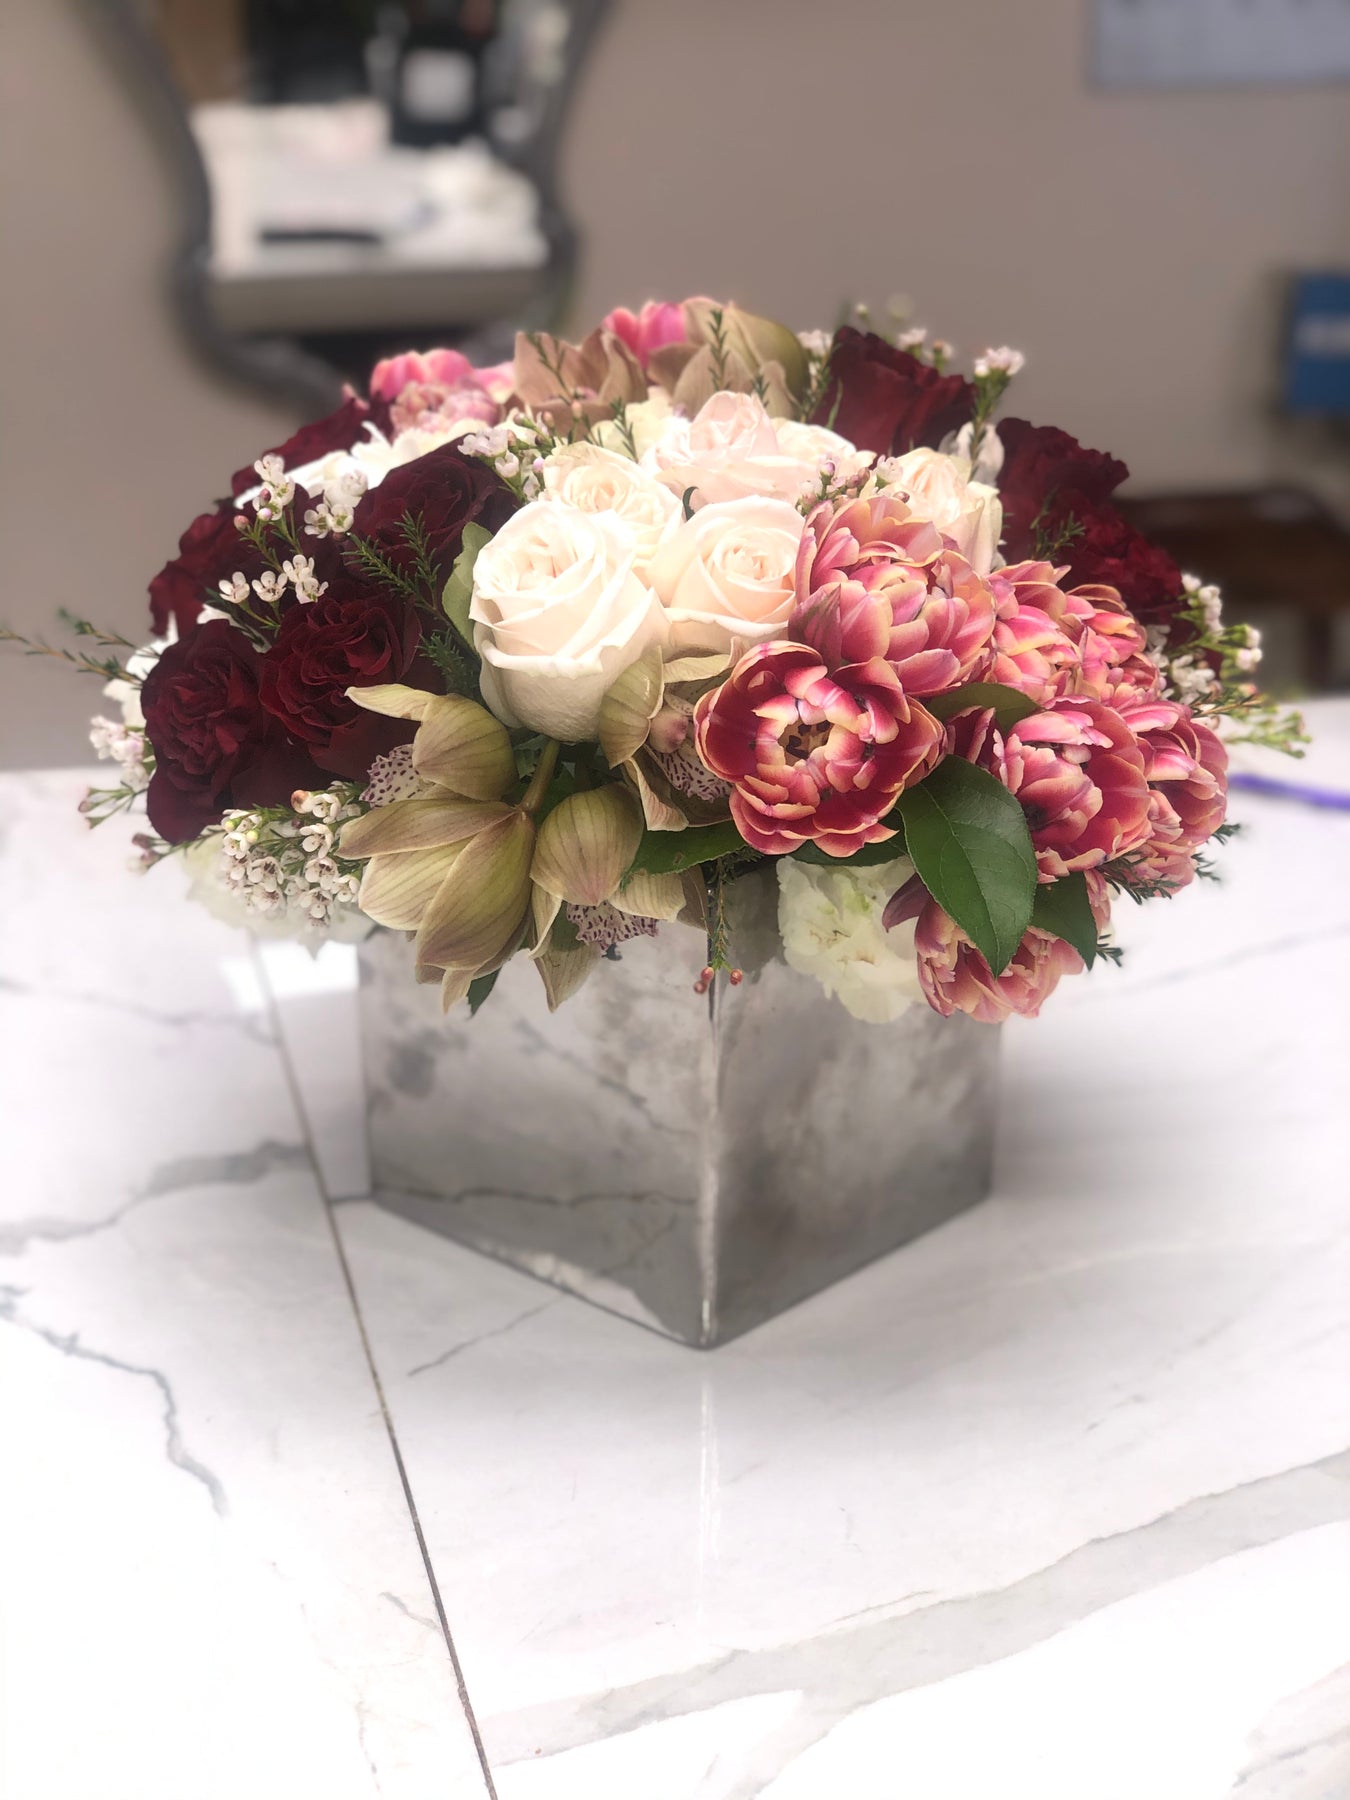 Flowers I Love You Box - Woodland Hills Florist – Tinas Flowers & Gifts